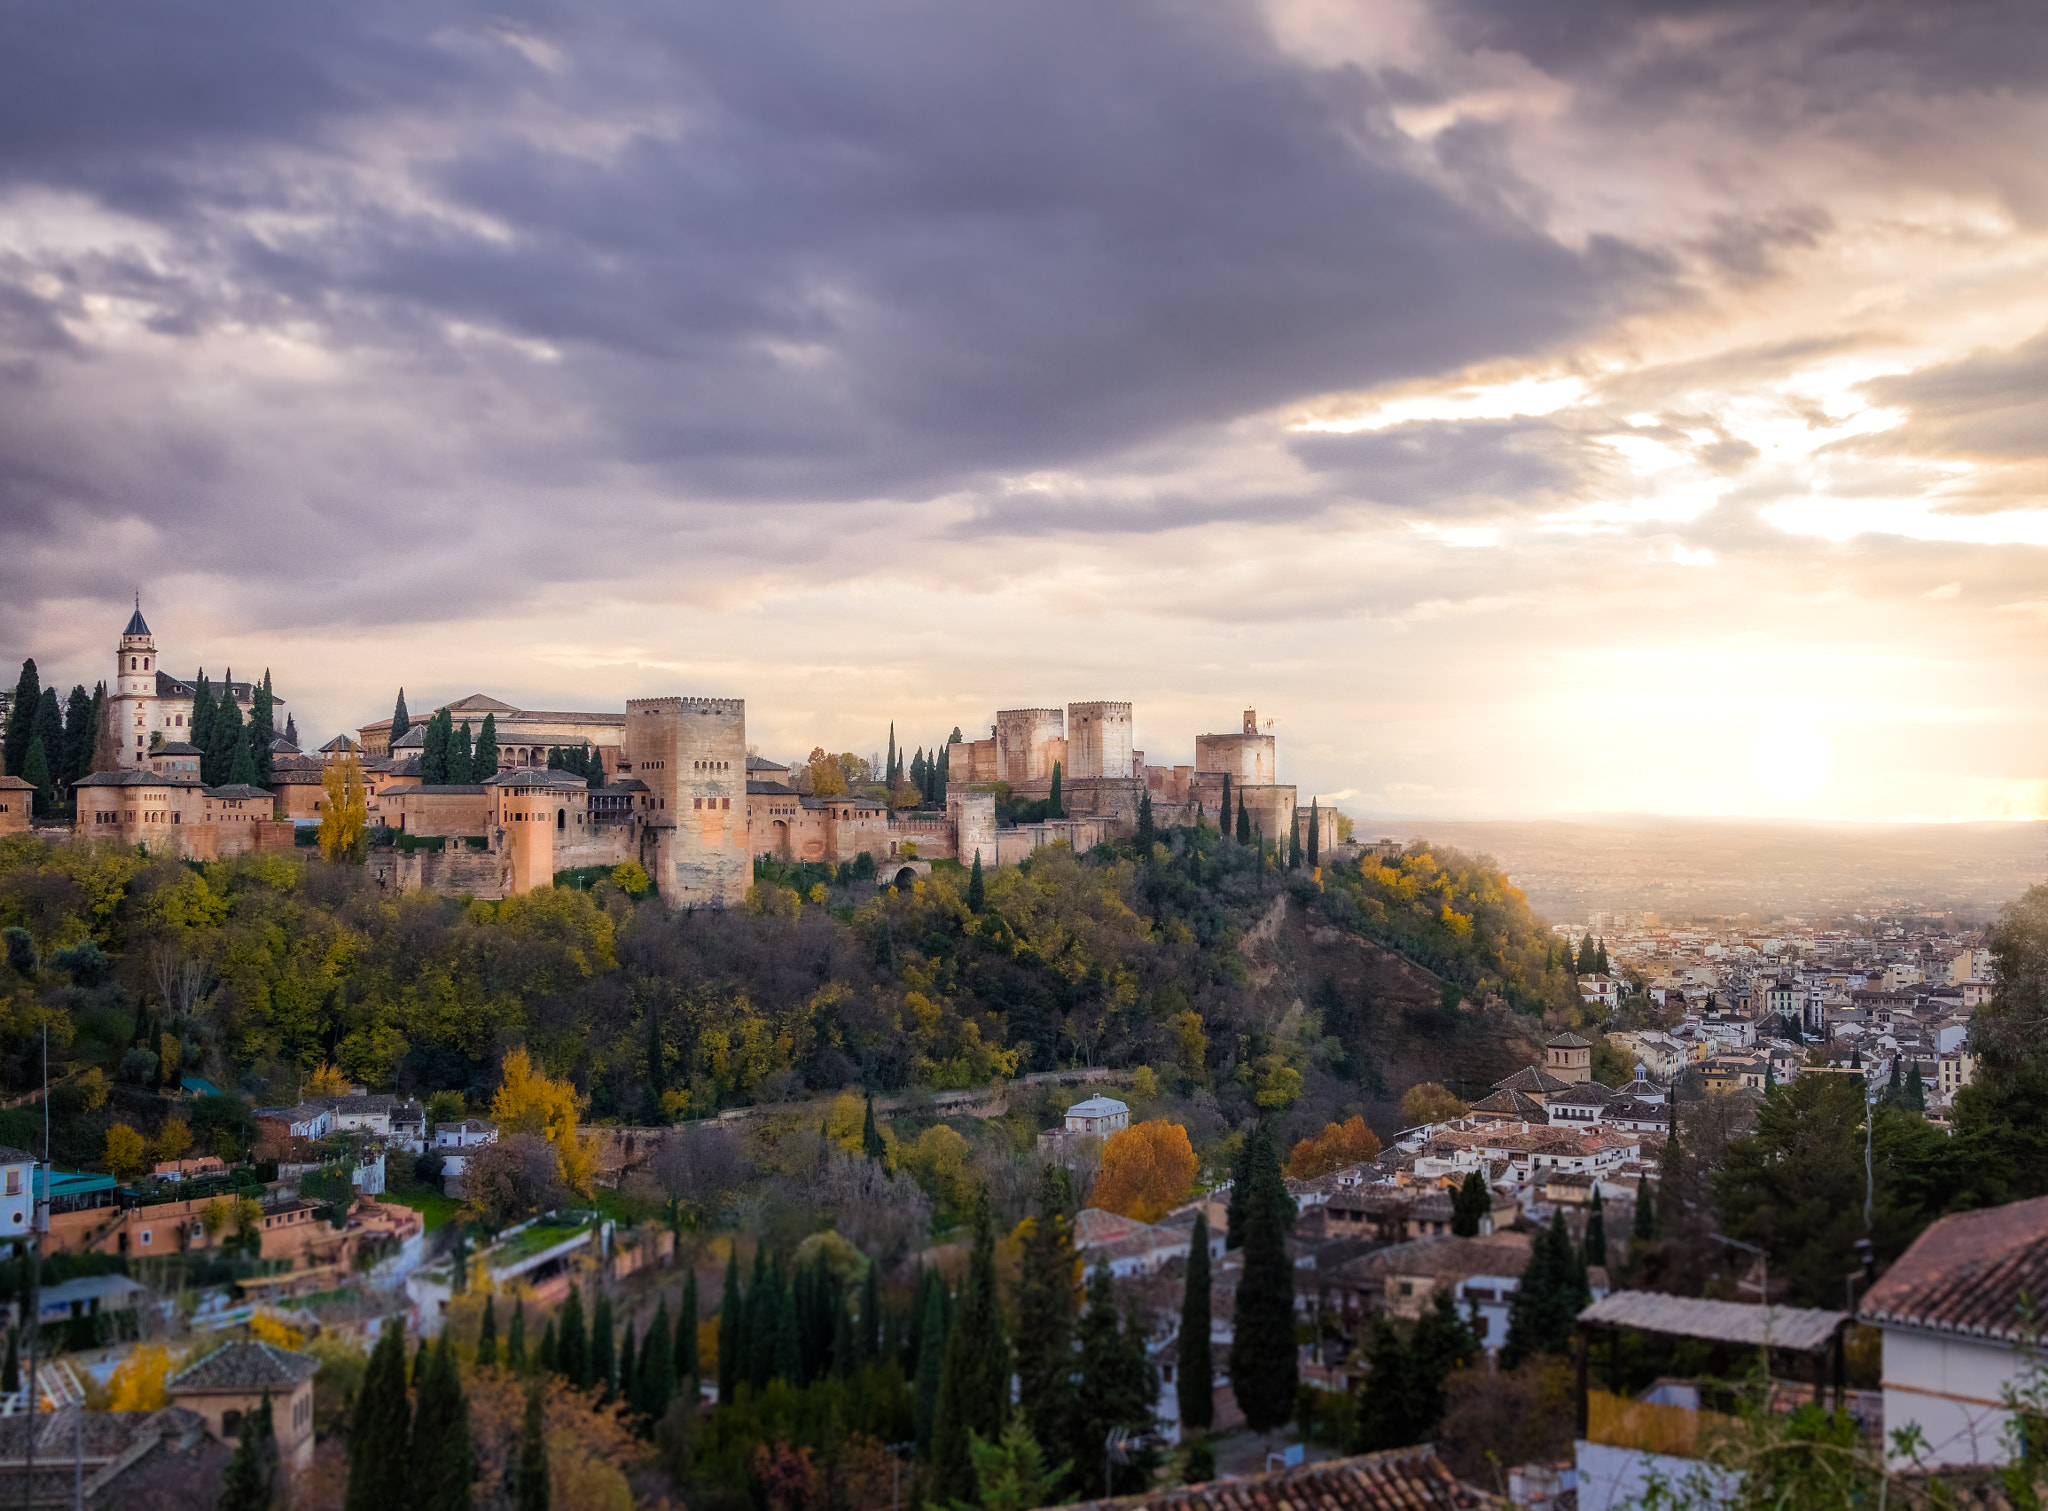 Canon EOS 60D + Sigma 24-105mm f/4 DG OS HSM | A sample photo. Alhambra of granada, spain. photography